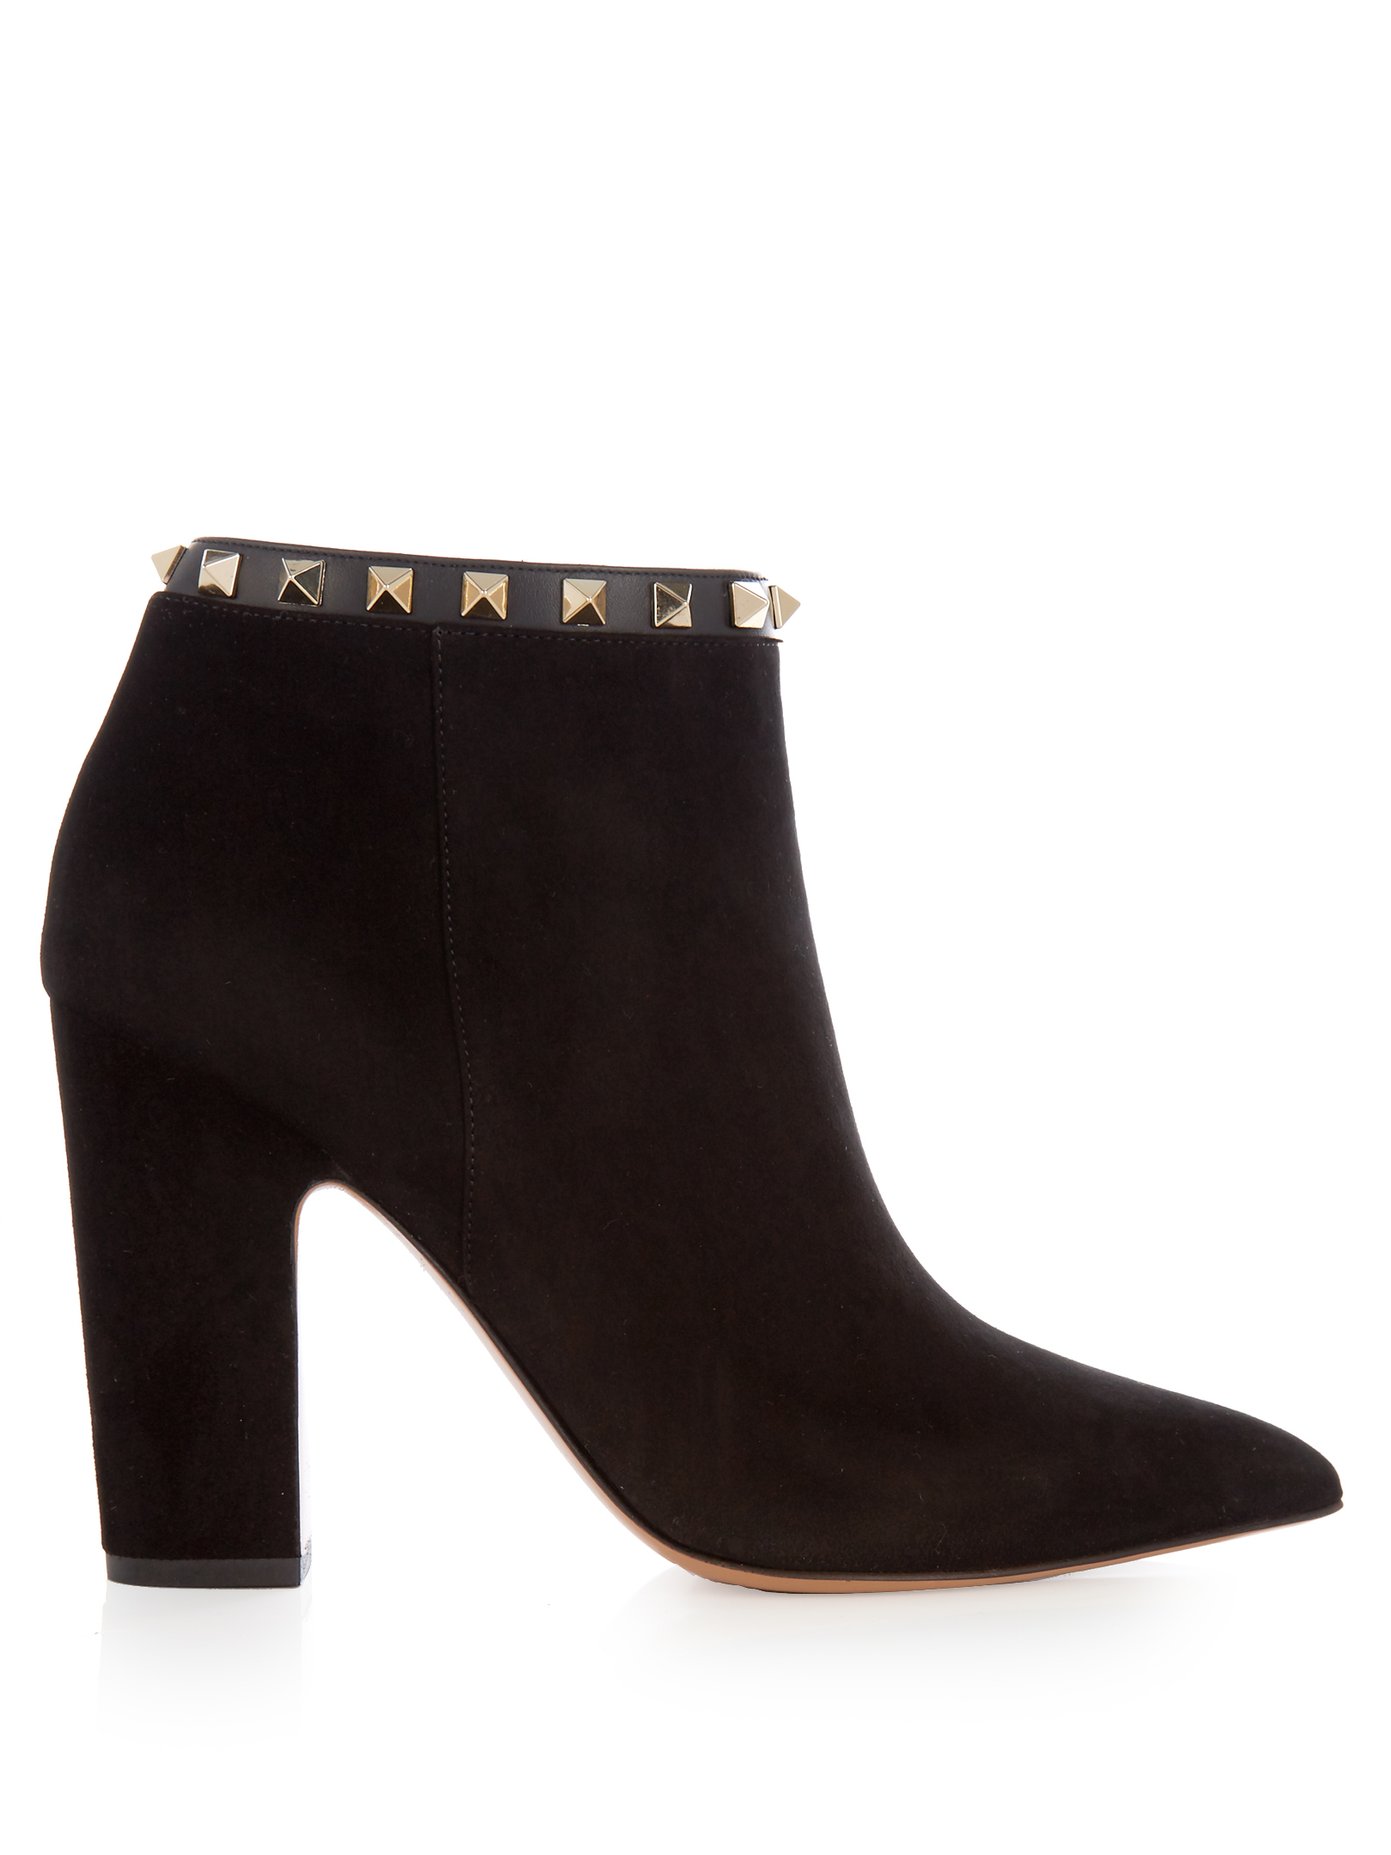 Rockstud suede ankle boots | Valentino 